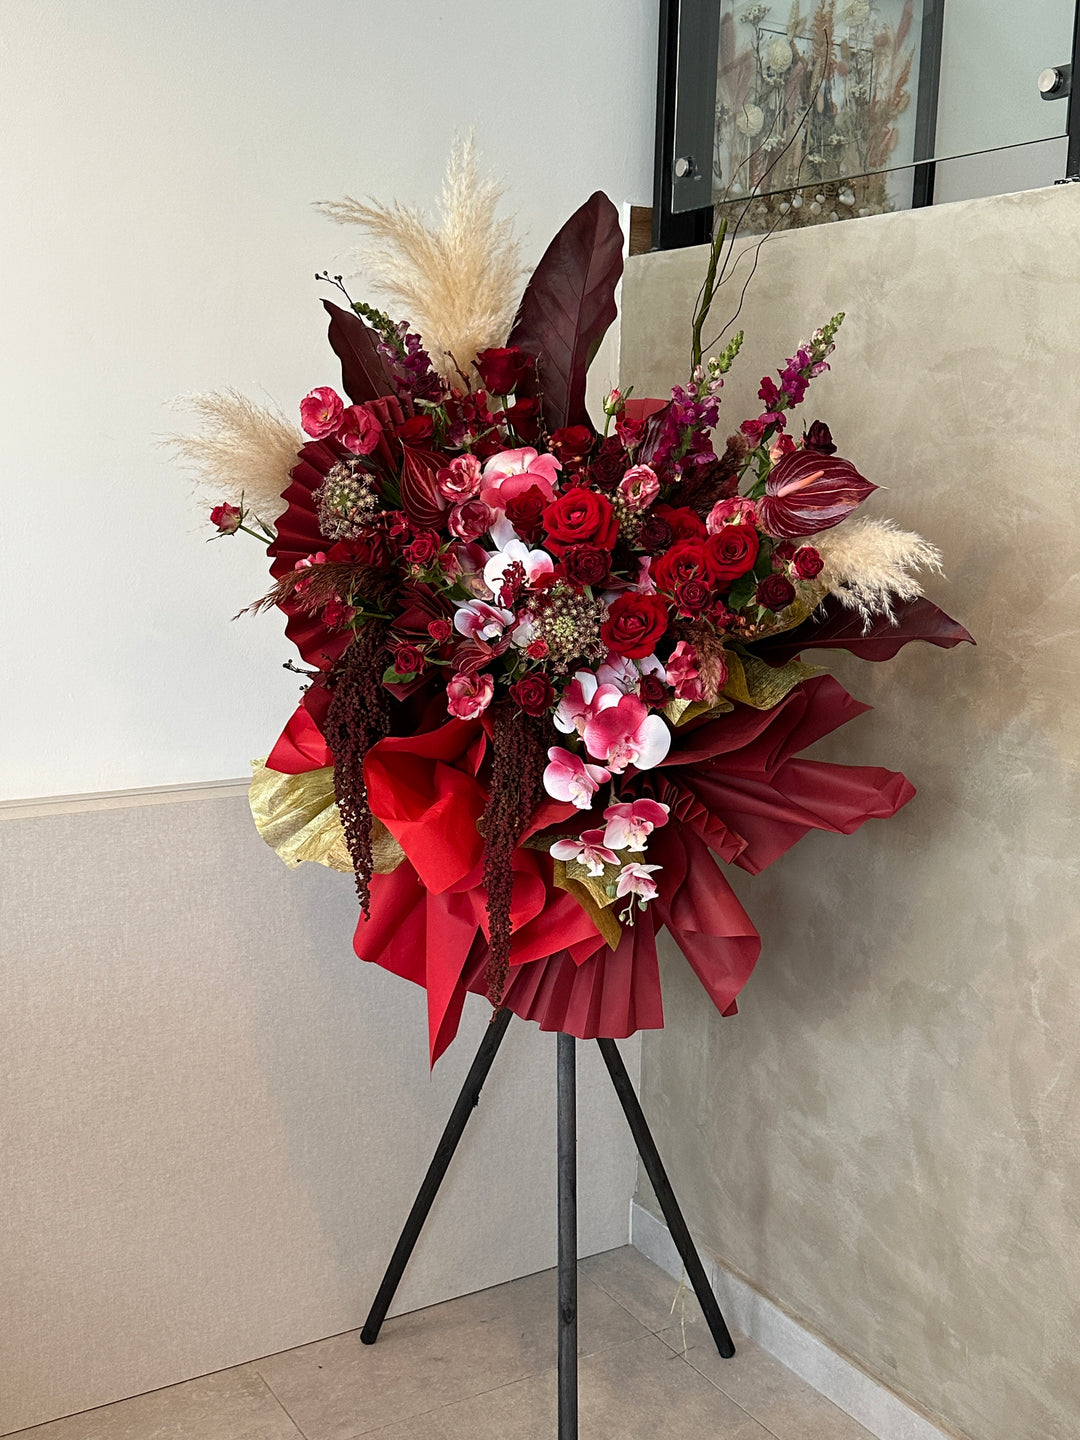  an arrangement of vibrant red flowers symbolizing success and celebration, flower delivery in penang